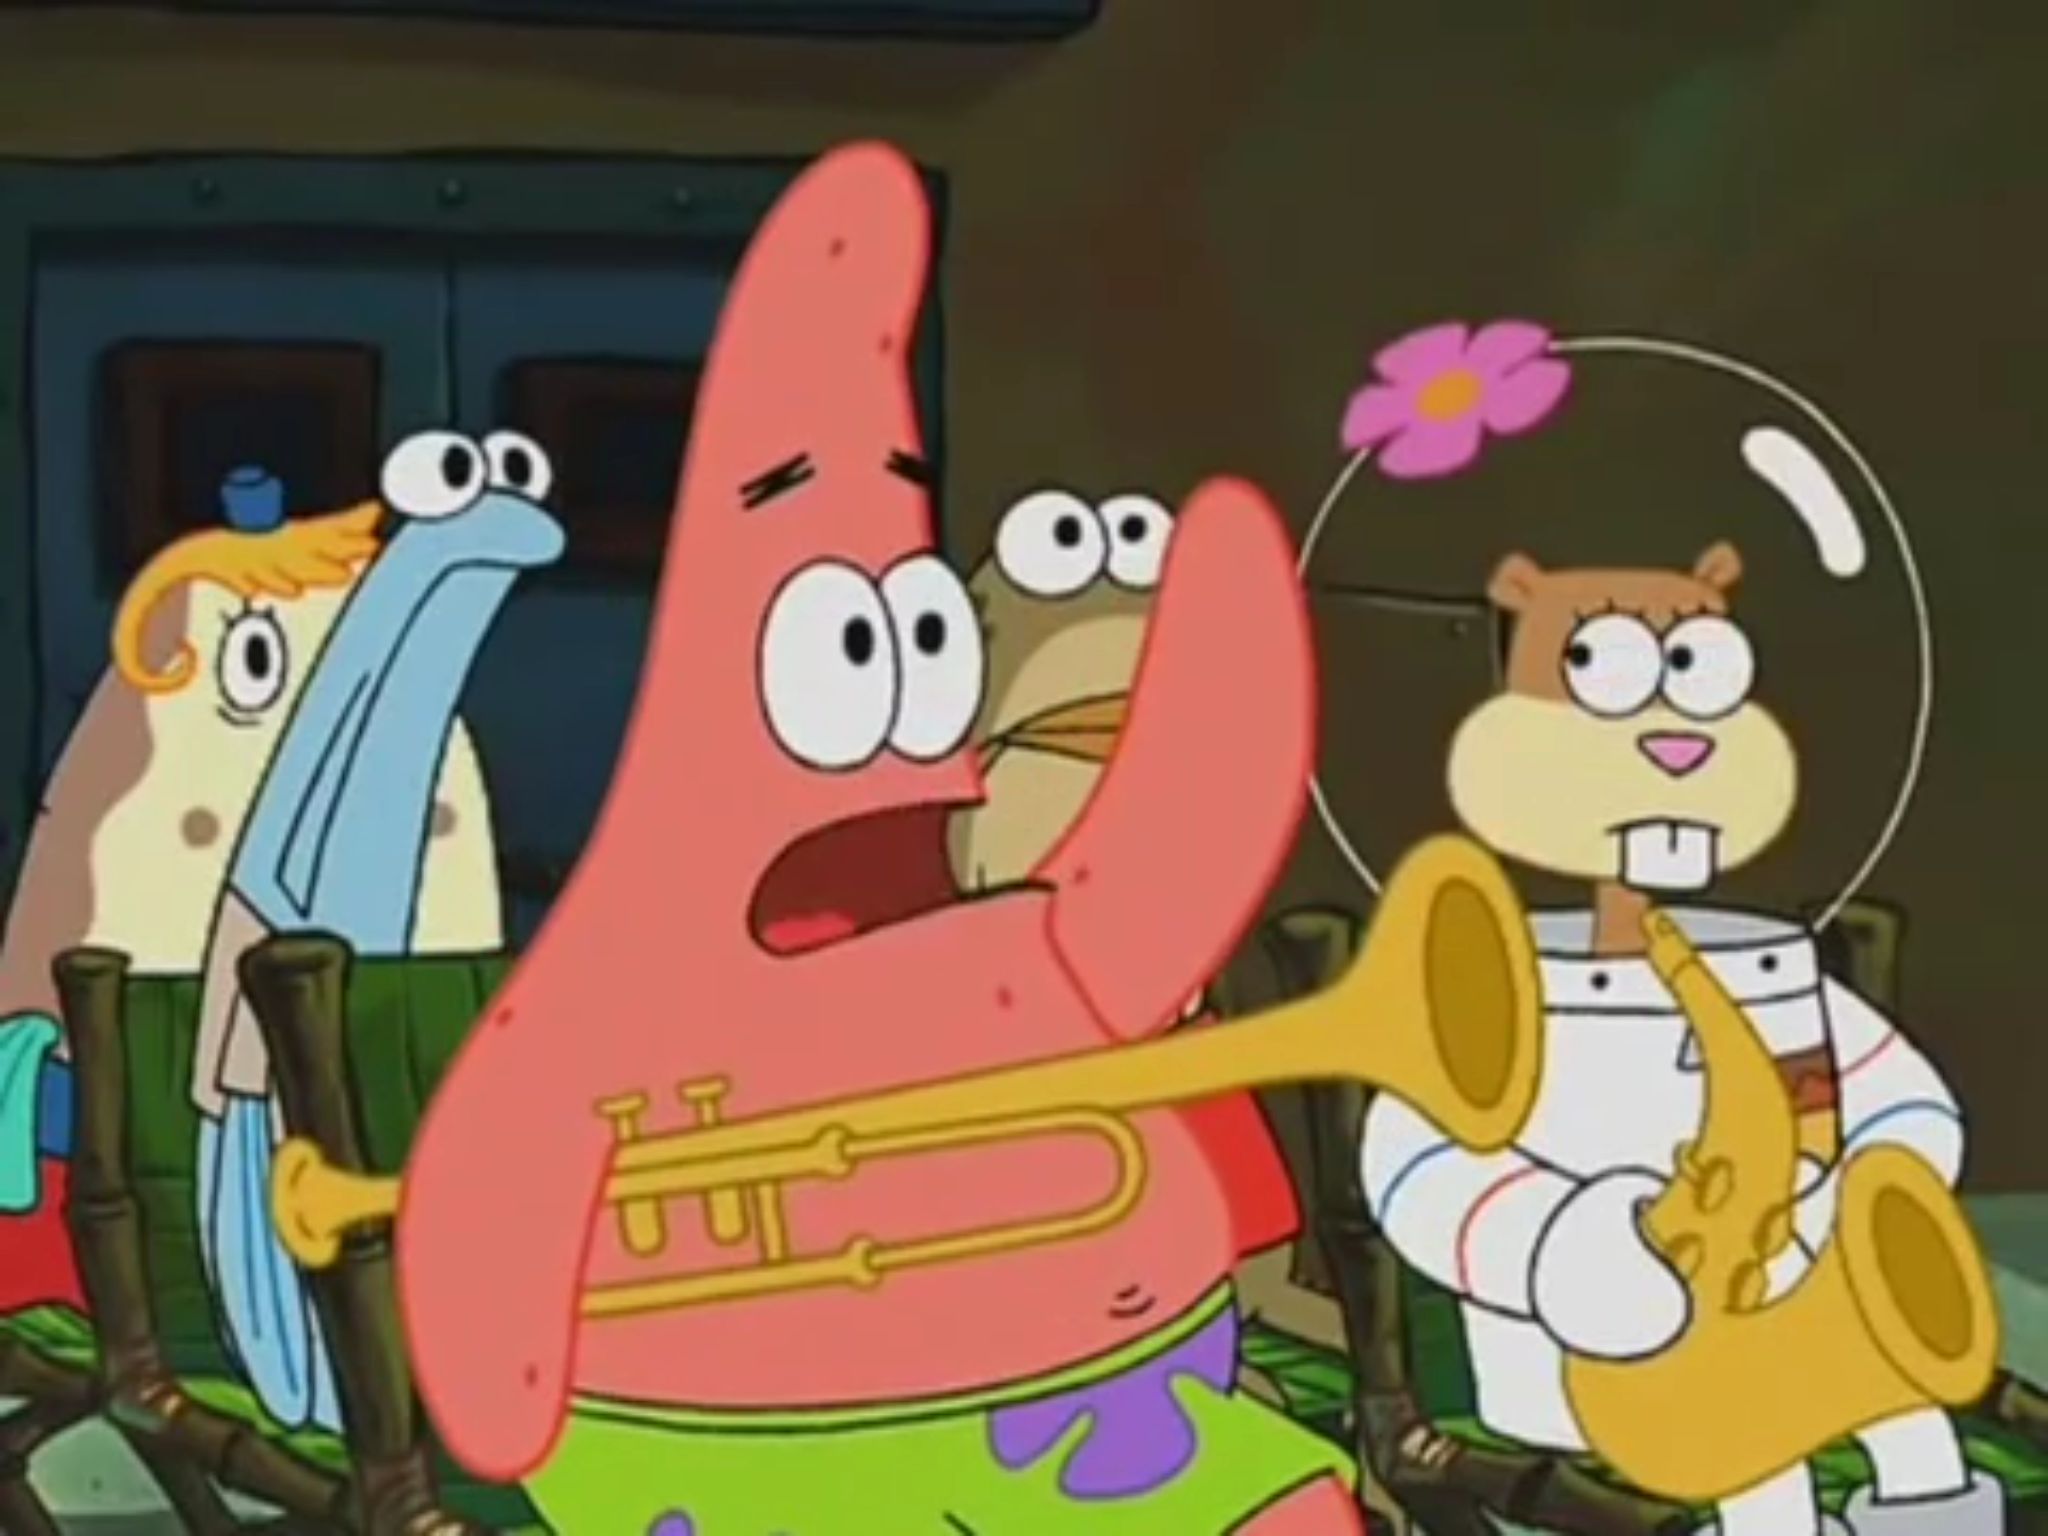 High Quality Is mayonnaise an instrument? Blank Meme Template